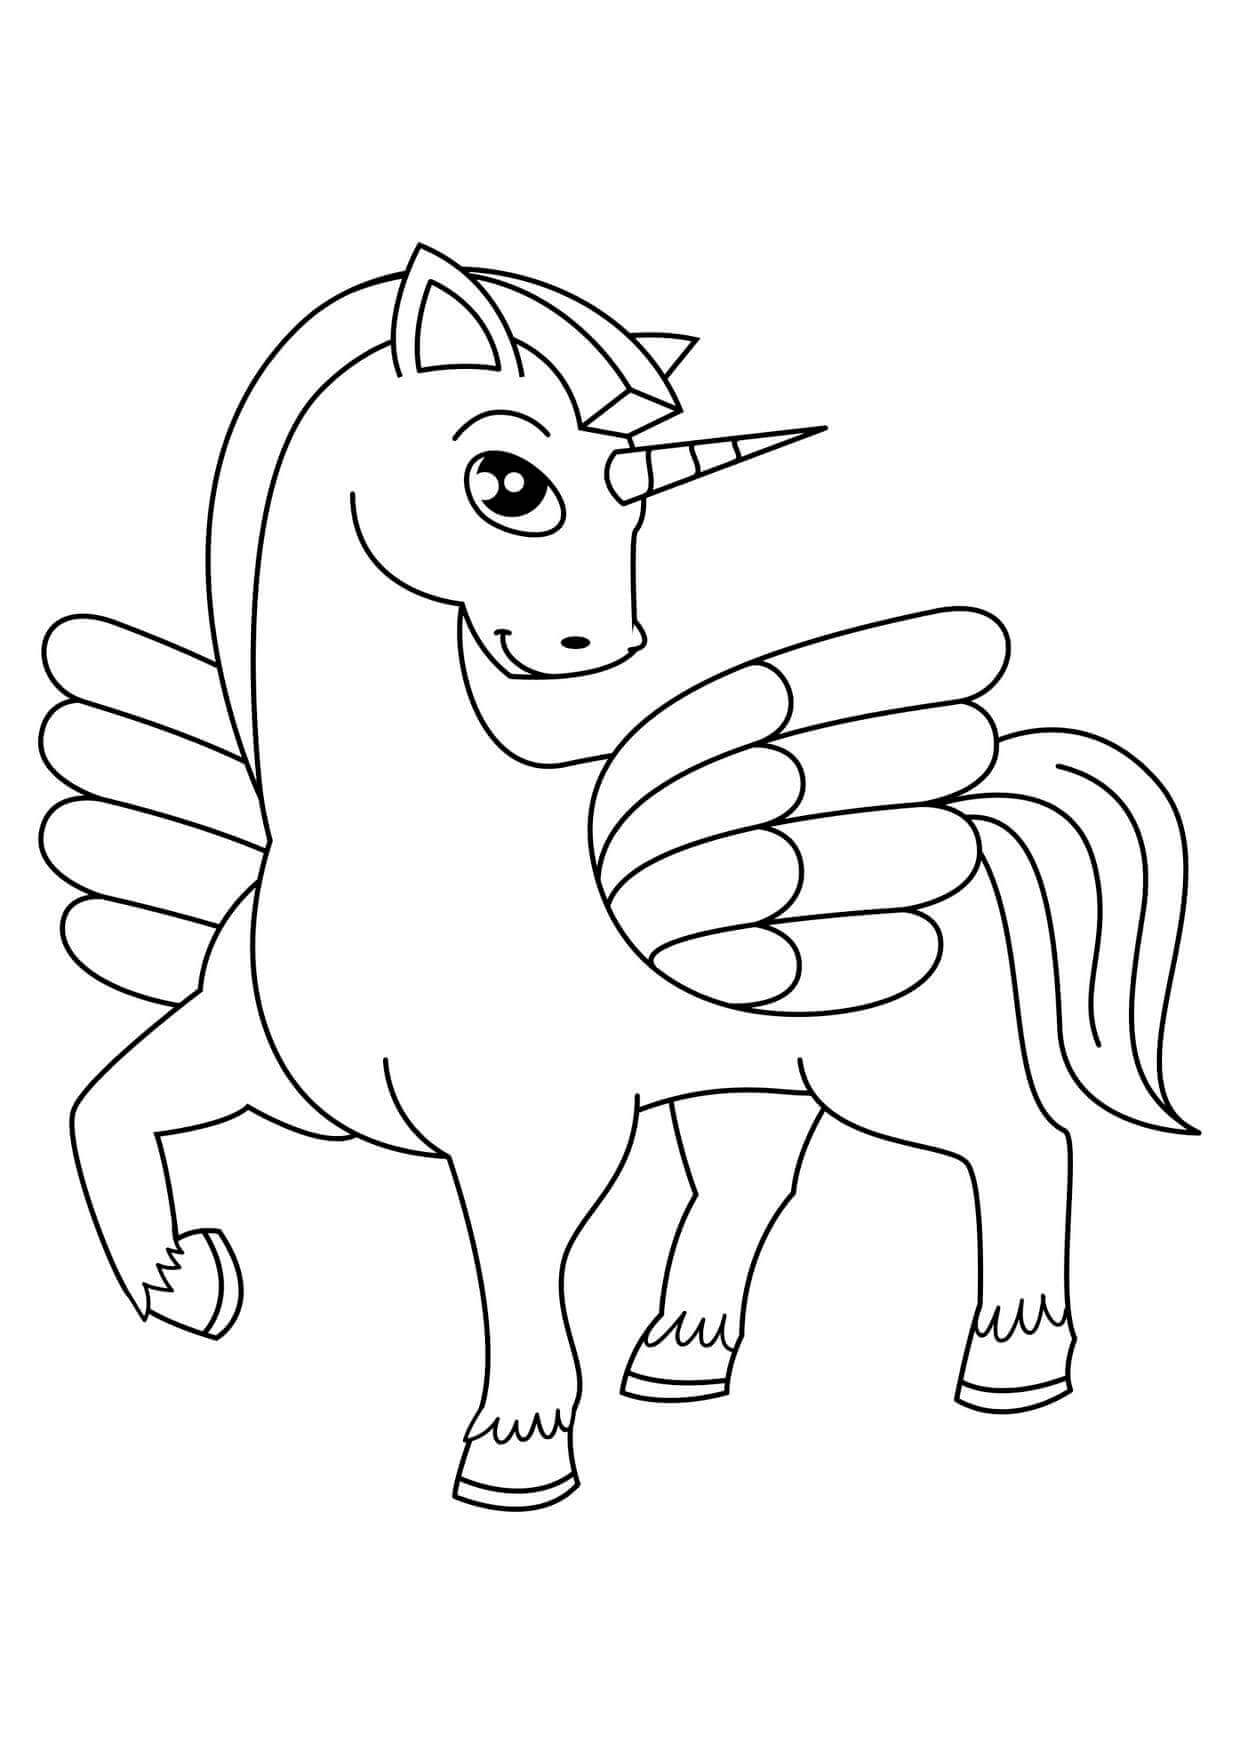 Unicorn Coloring Page